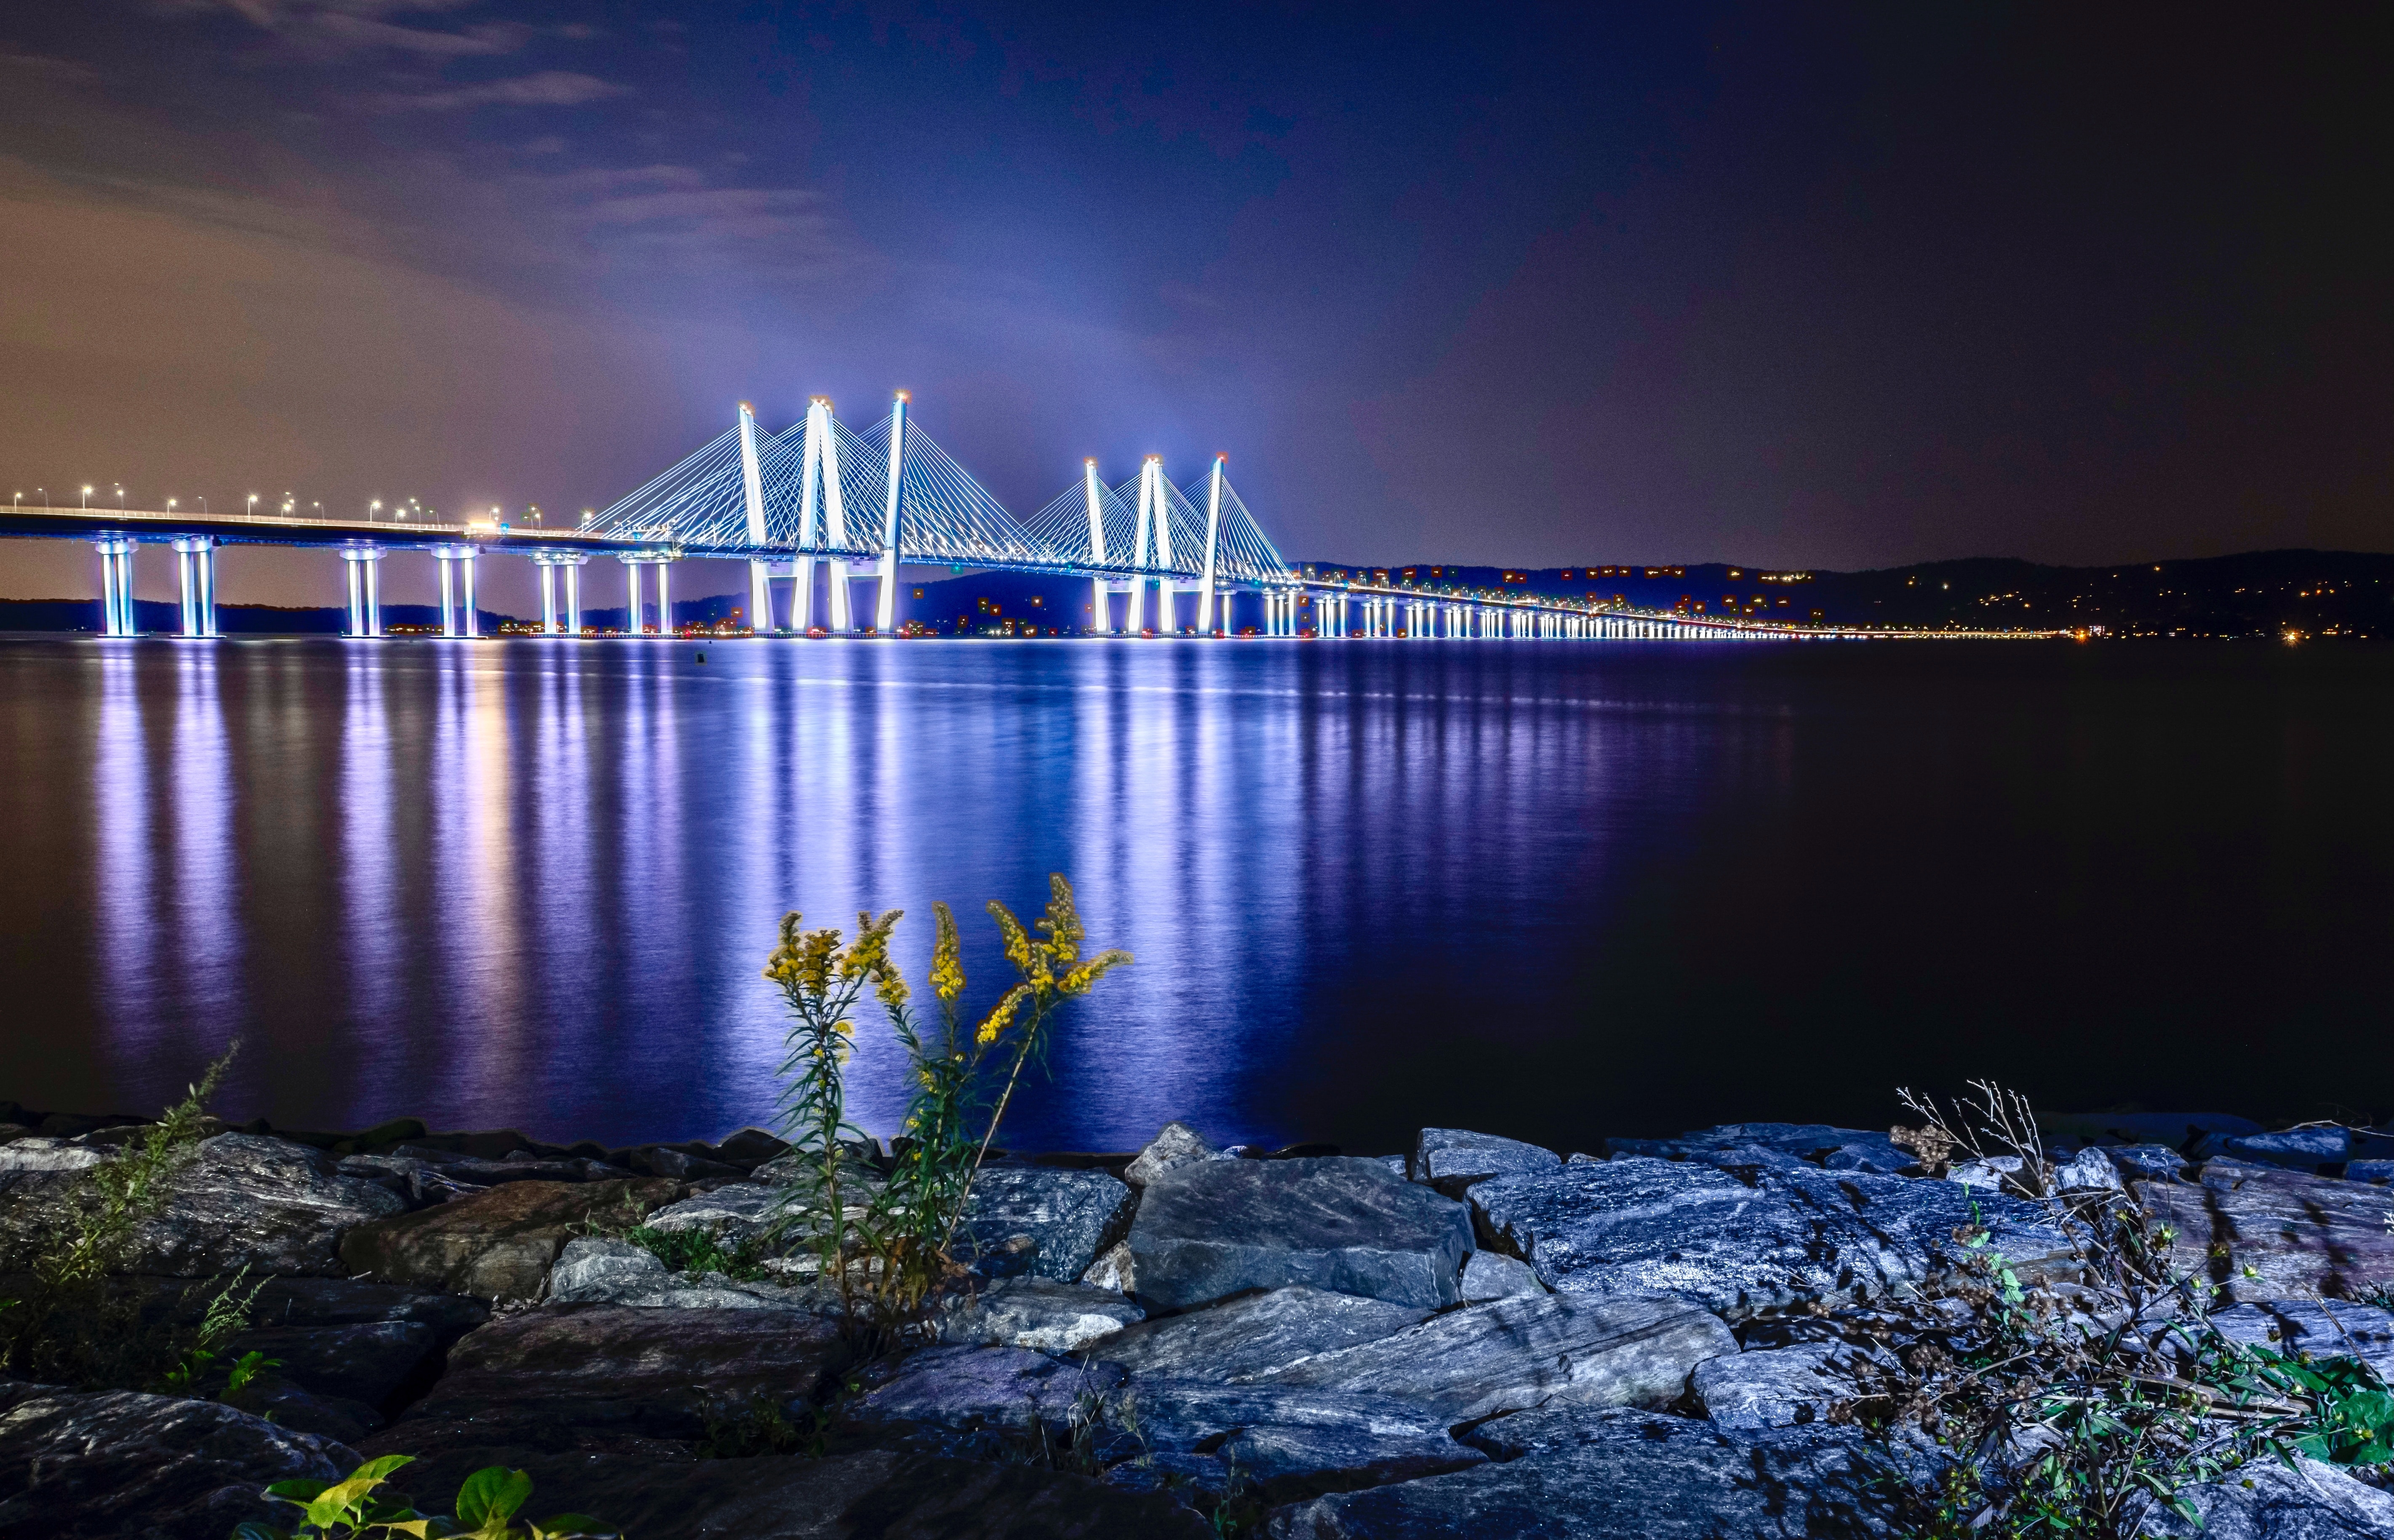 HD wallpaper, Night Time, River, 5K, Body Of Water, Landscape, Reflection, Dawn, Cable Stayed Bridge, Sunset